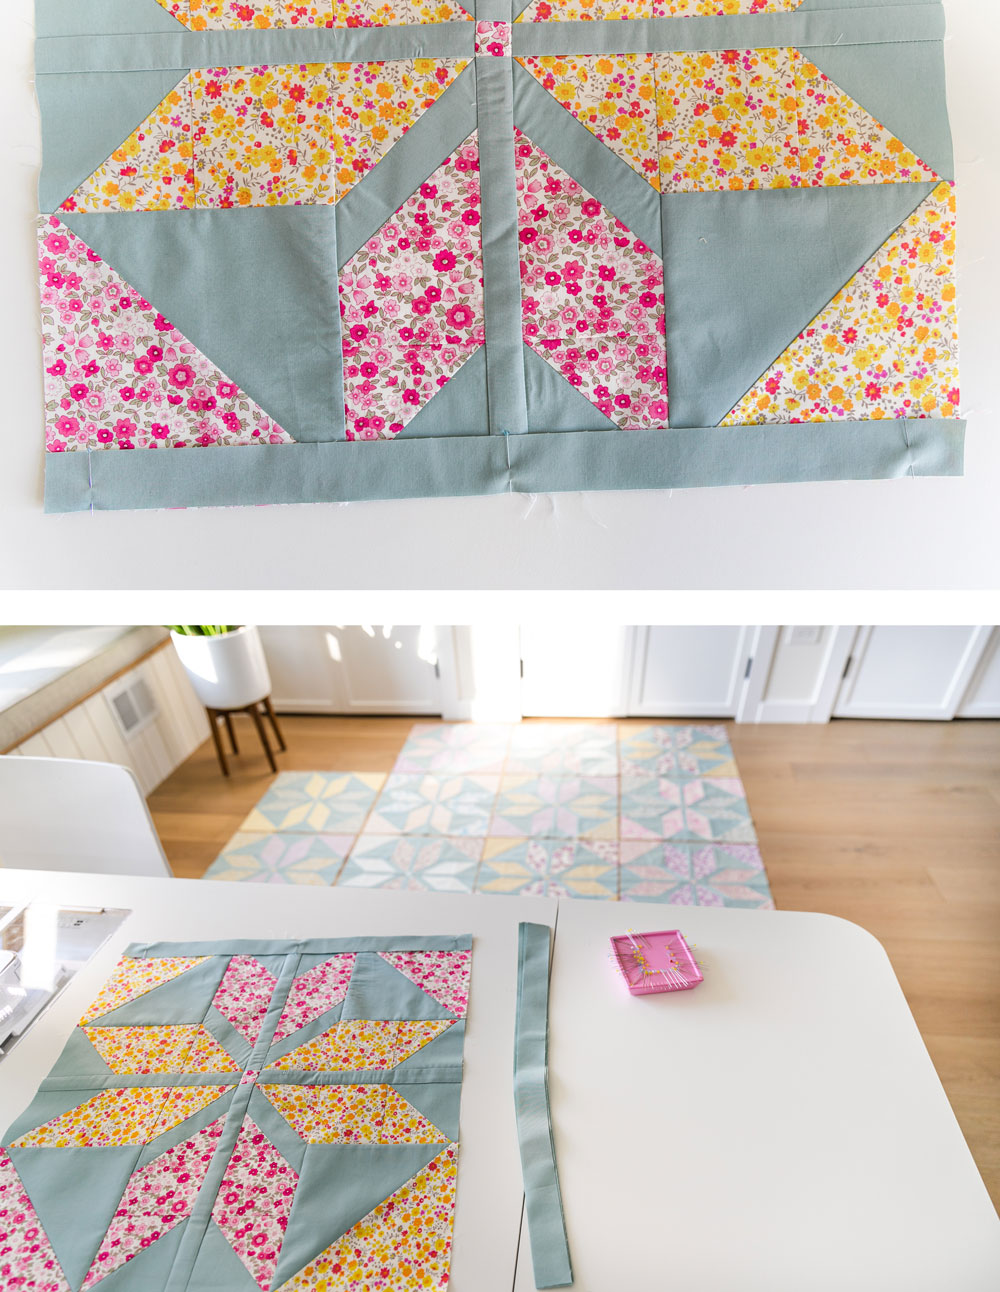 Week 6 is the final week of the Holiday Party quilt sew along! This week we assemble the quilt blocks and finish the top. suzyquilts.com #quiltalong #modernquilt